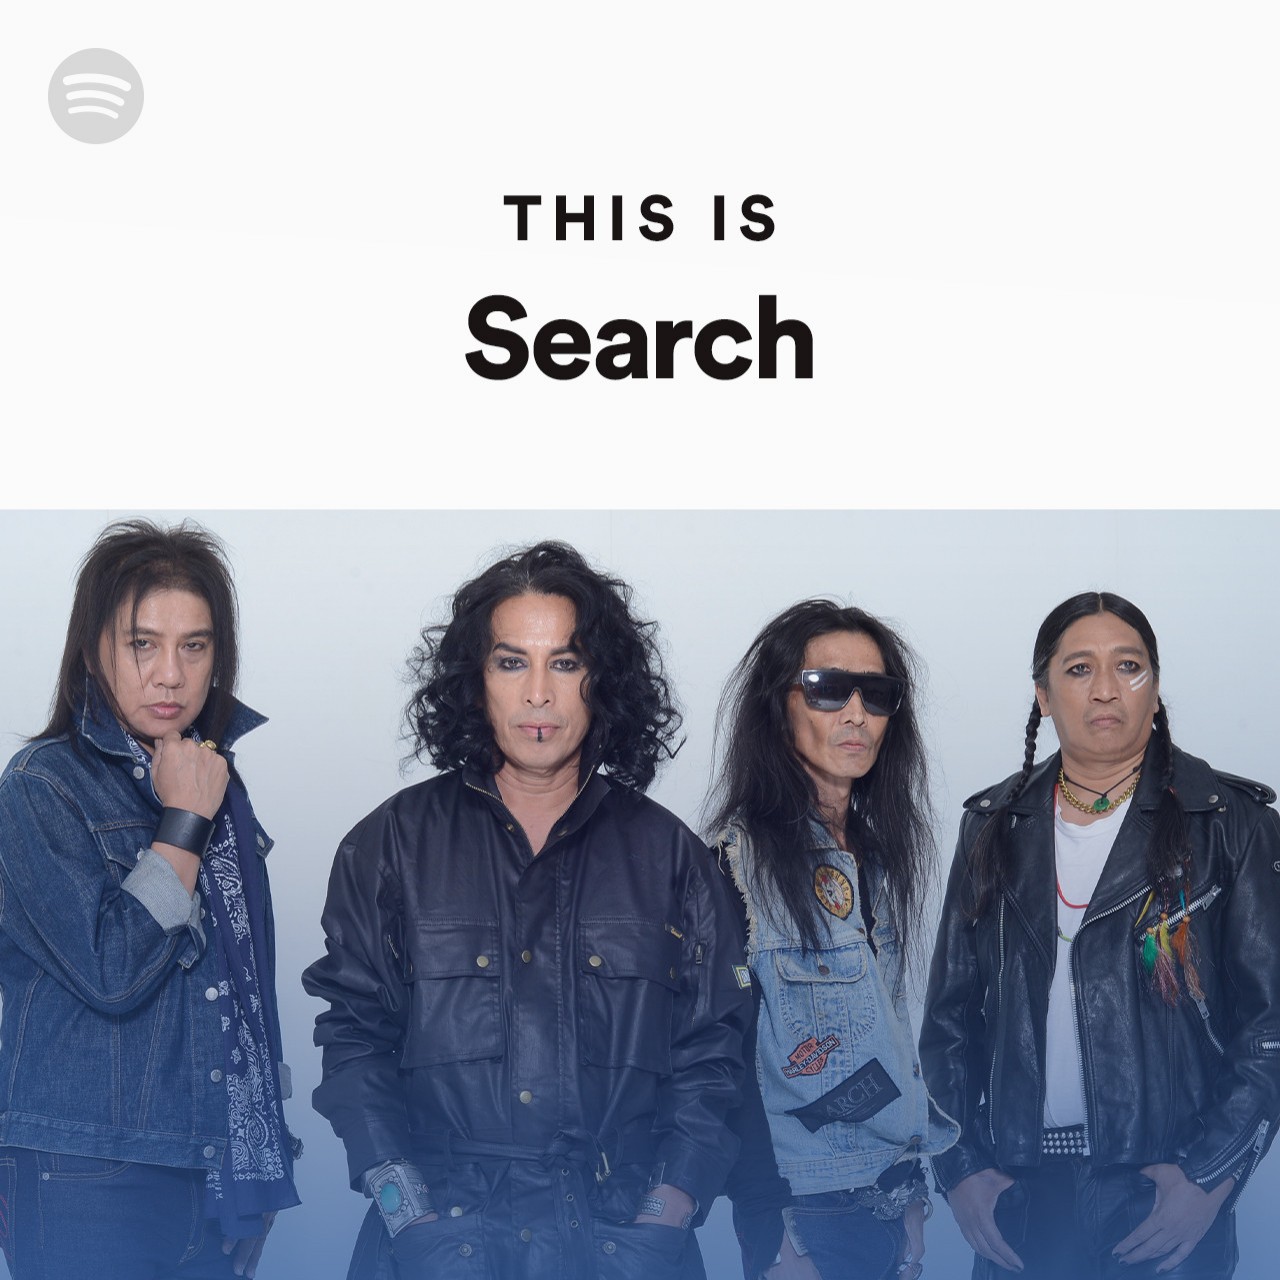 This Is Search